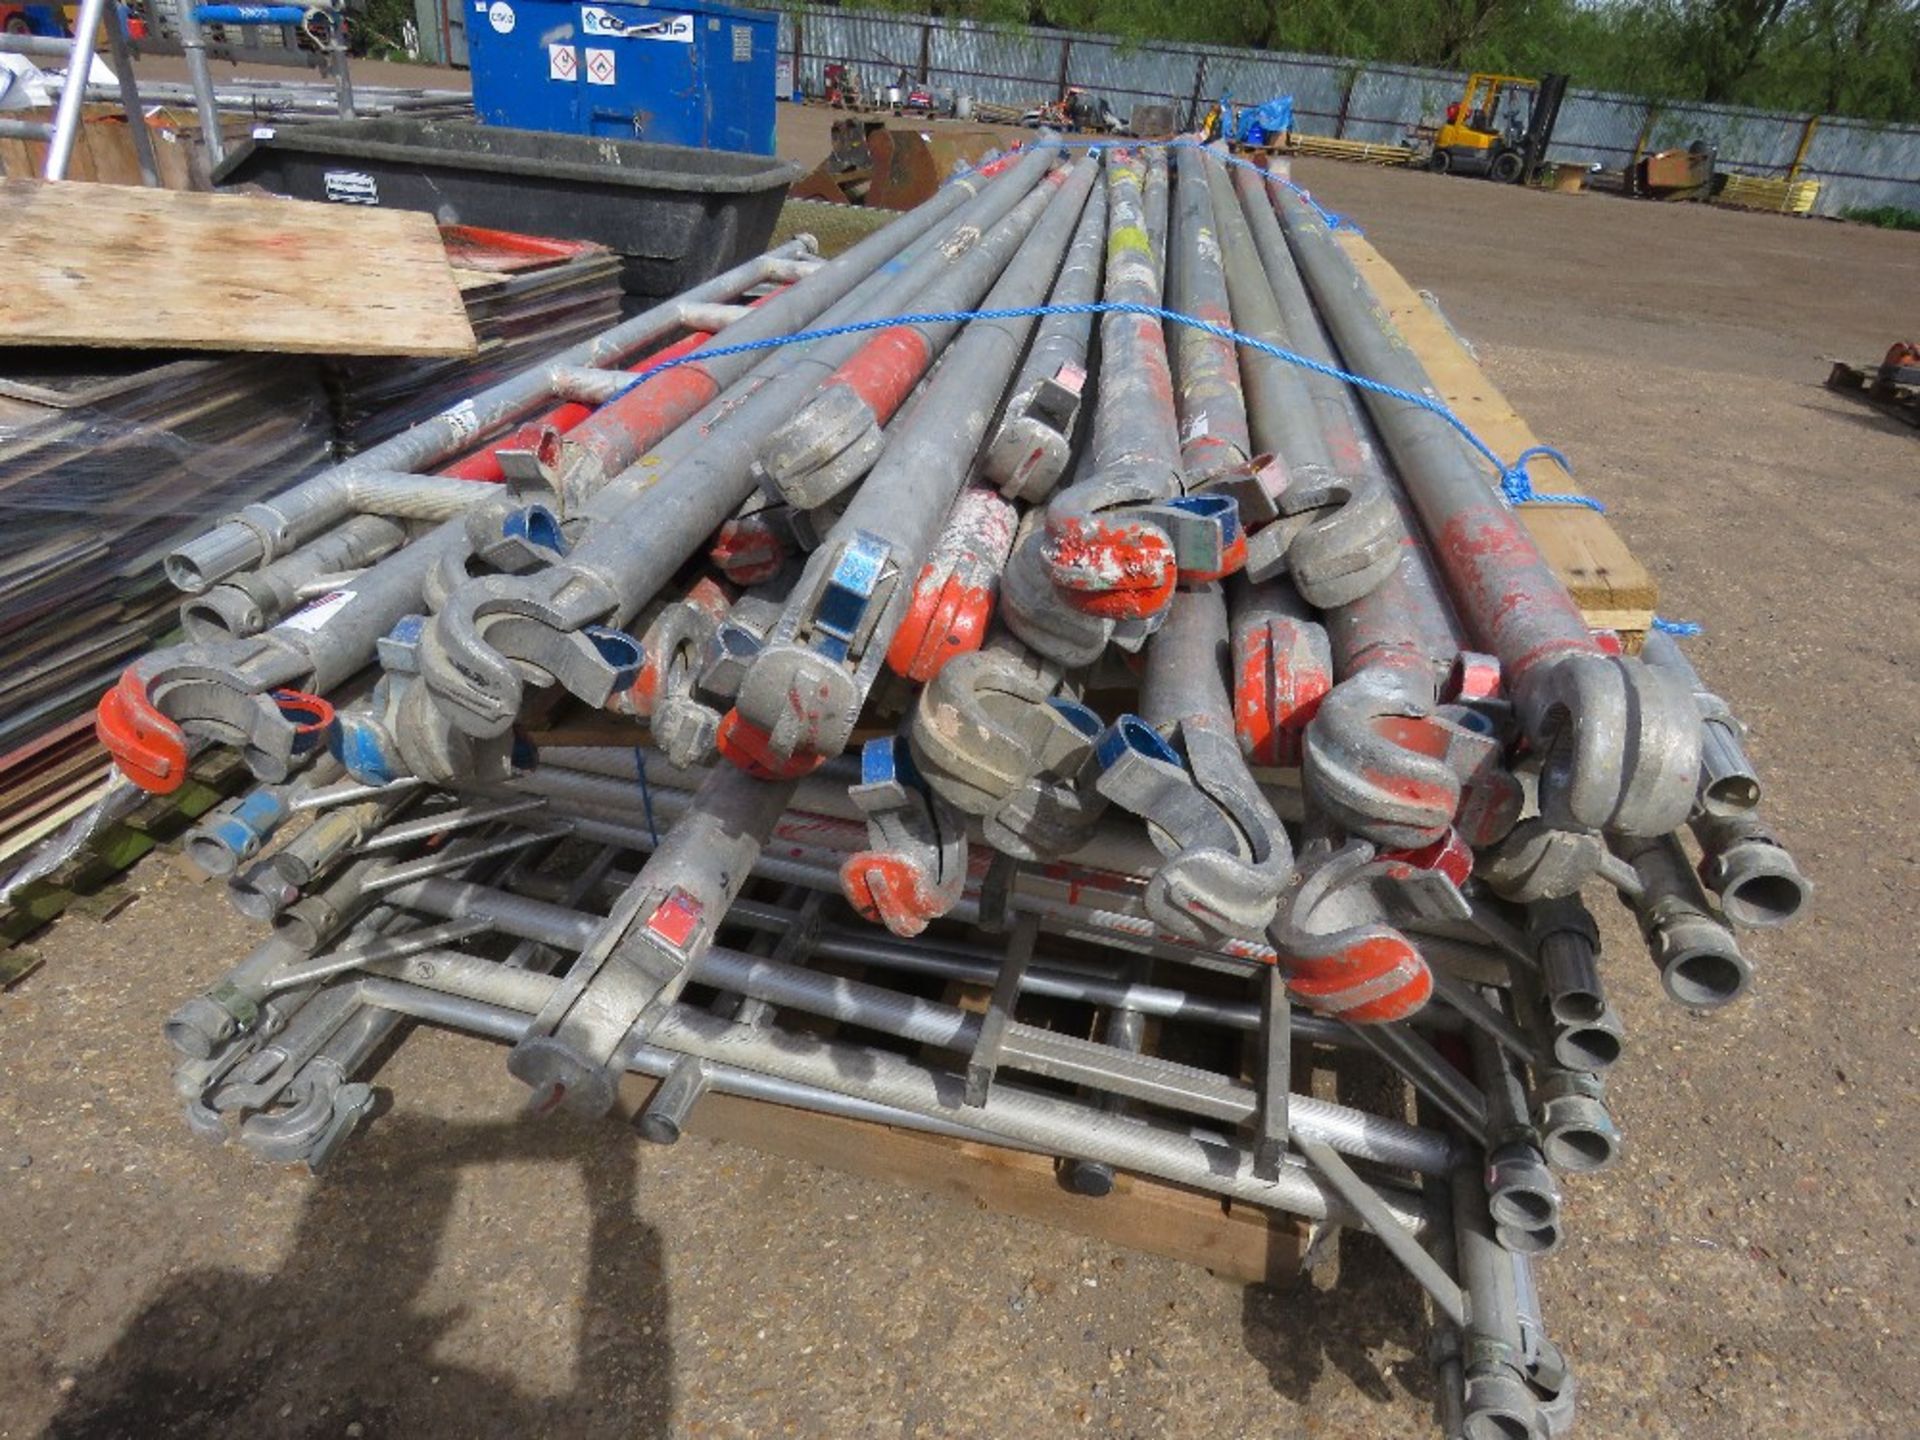 STACK OF ASSORTED SCAFFOLD TOWER PARTS INCLUDING 14NO DOUBLE FRAMES PLUS A SELECTION OF POLES AS SHW